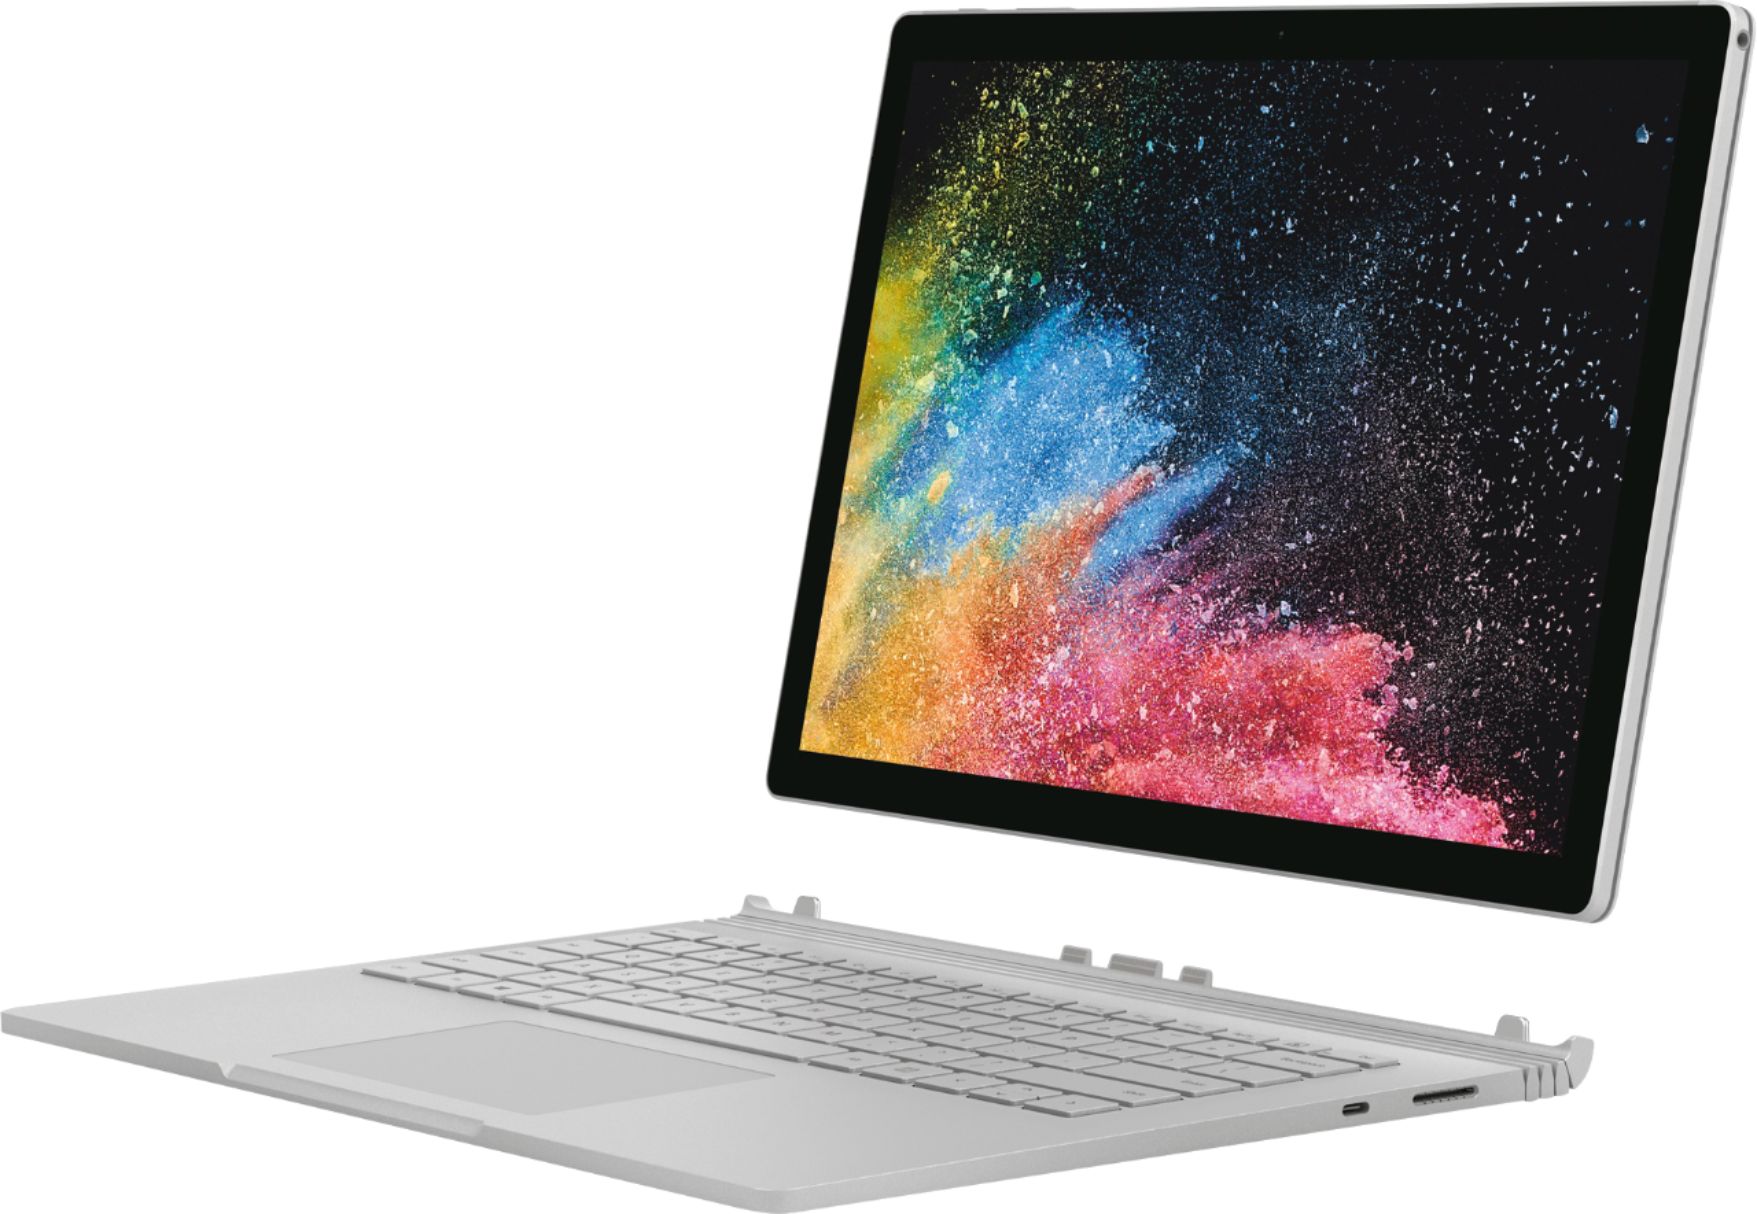 Microsoft – Geek Squad Certified Refurbished Surface Book 2 – 13.5″ Touch-Screen Laptop – Intel Core i5 – 8GB Memory – 256GB SSD – Platinum